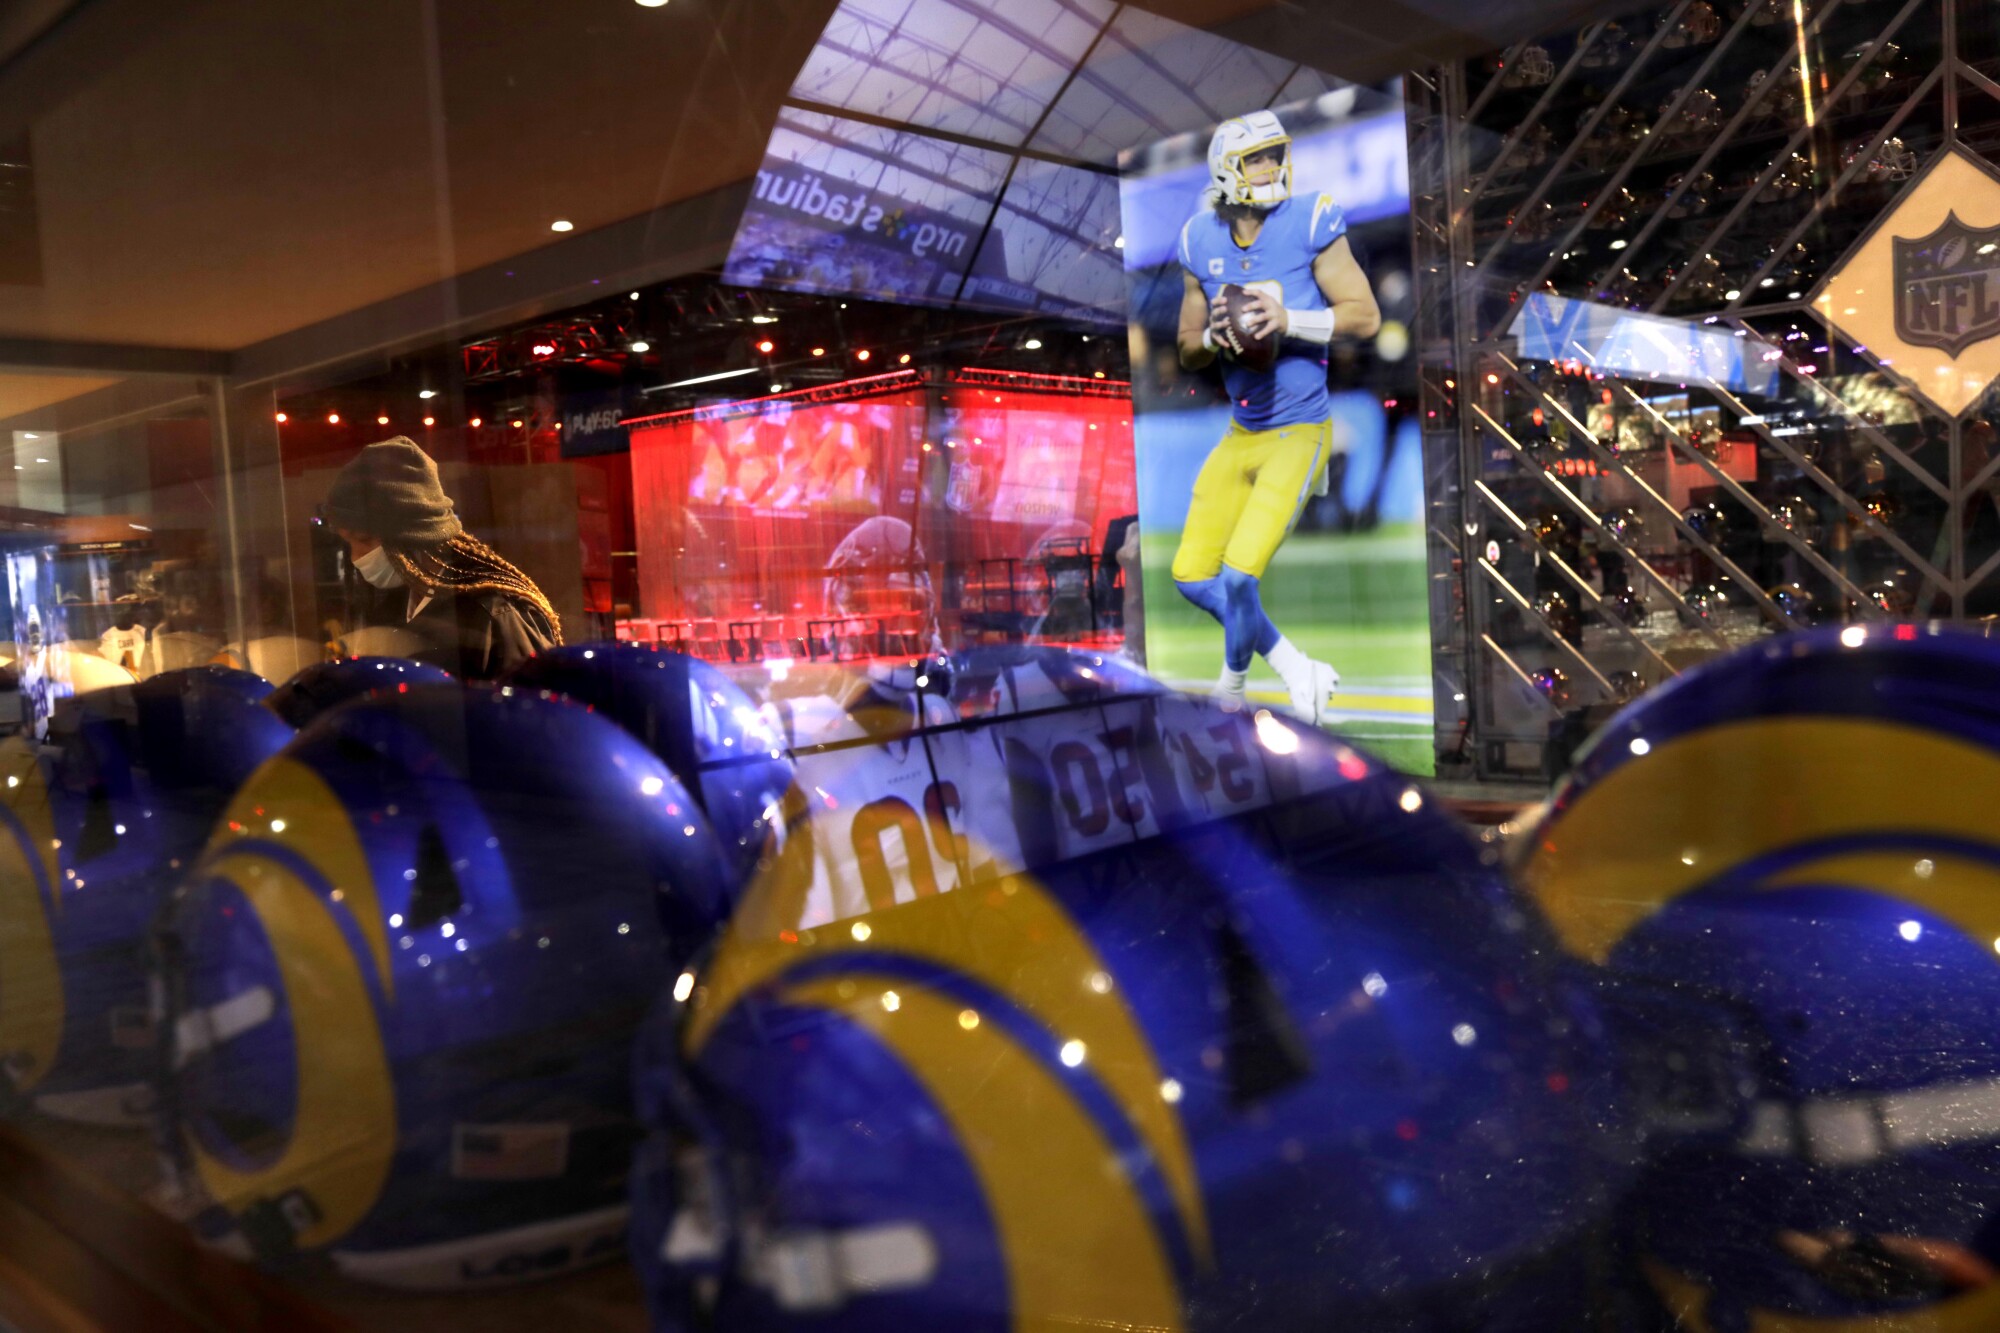 Rams helmets are seen through glass that reflects video images of football scenes